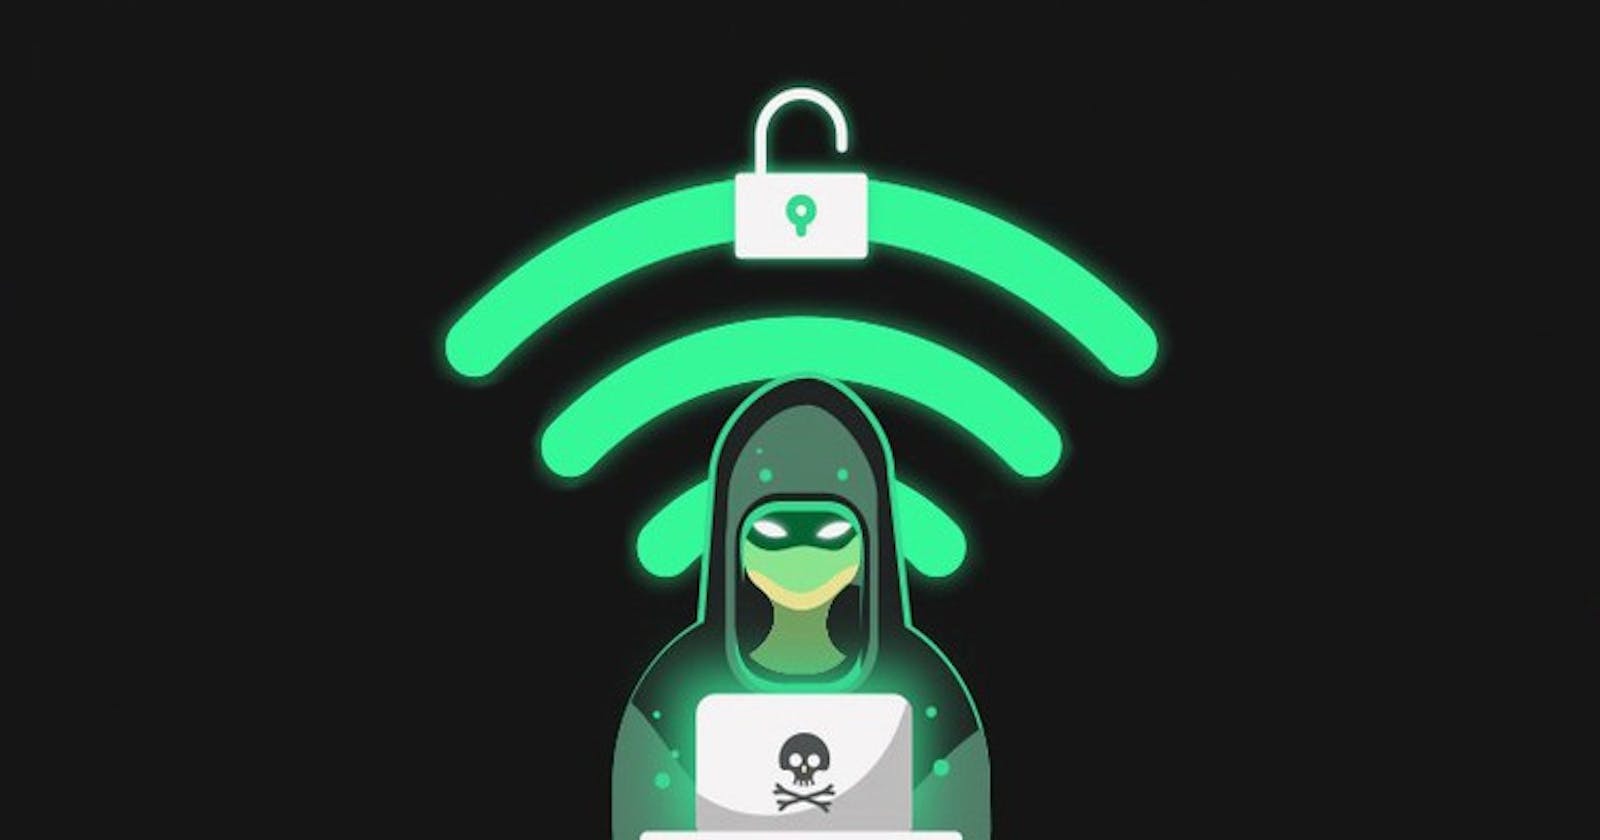 Step-by-Step Guide to Hacking WPA and WPA2 WiFi